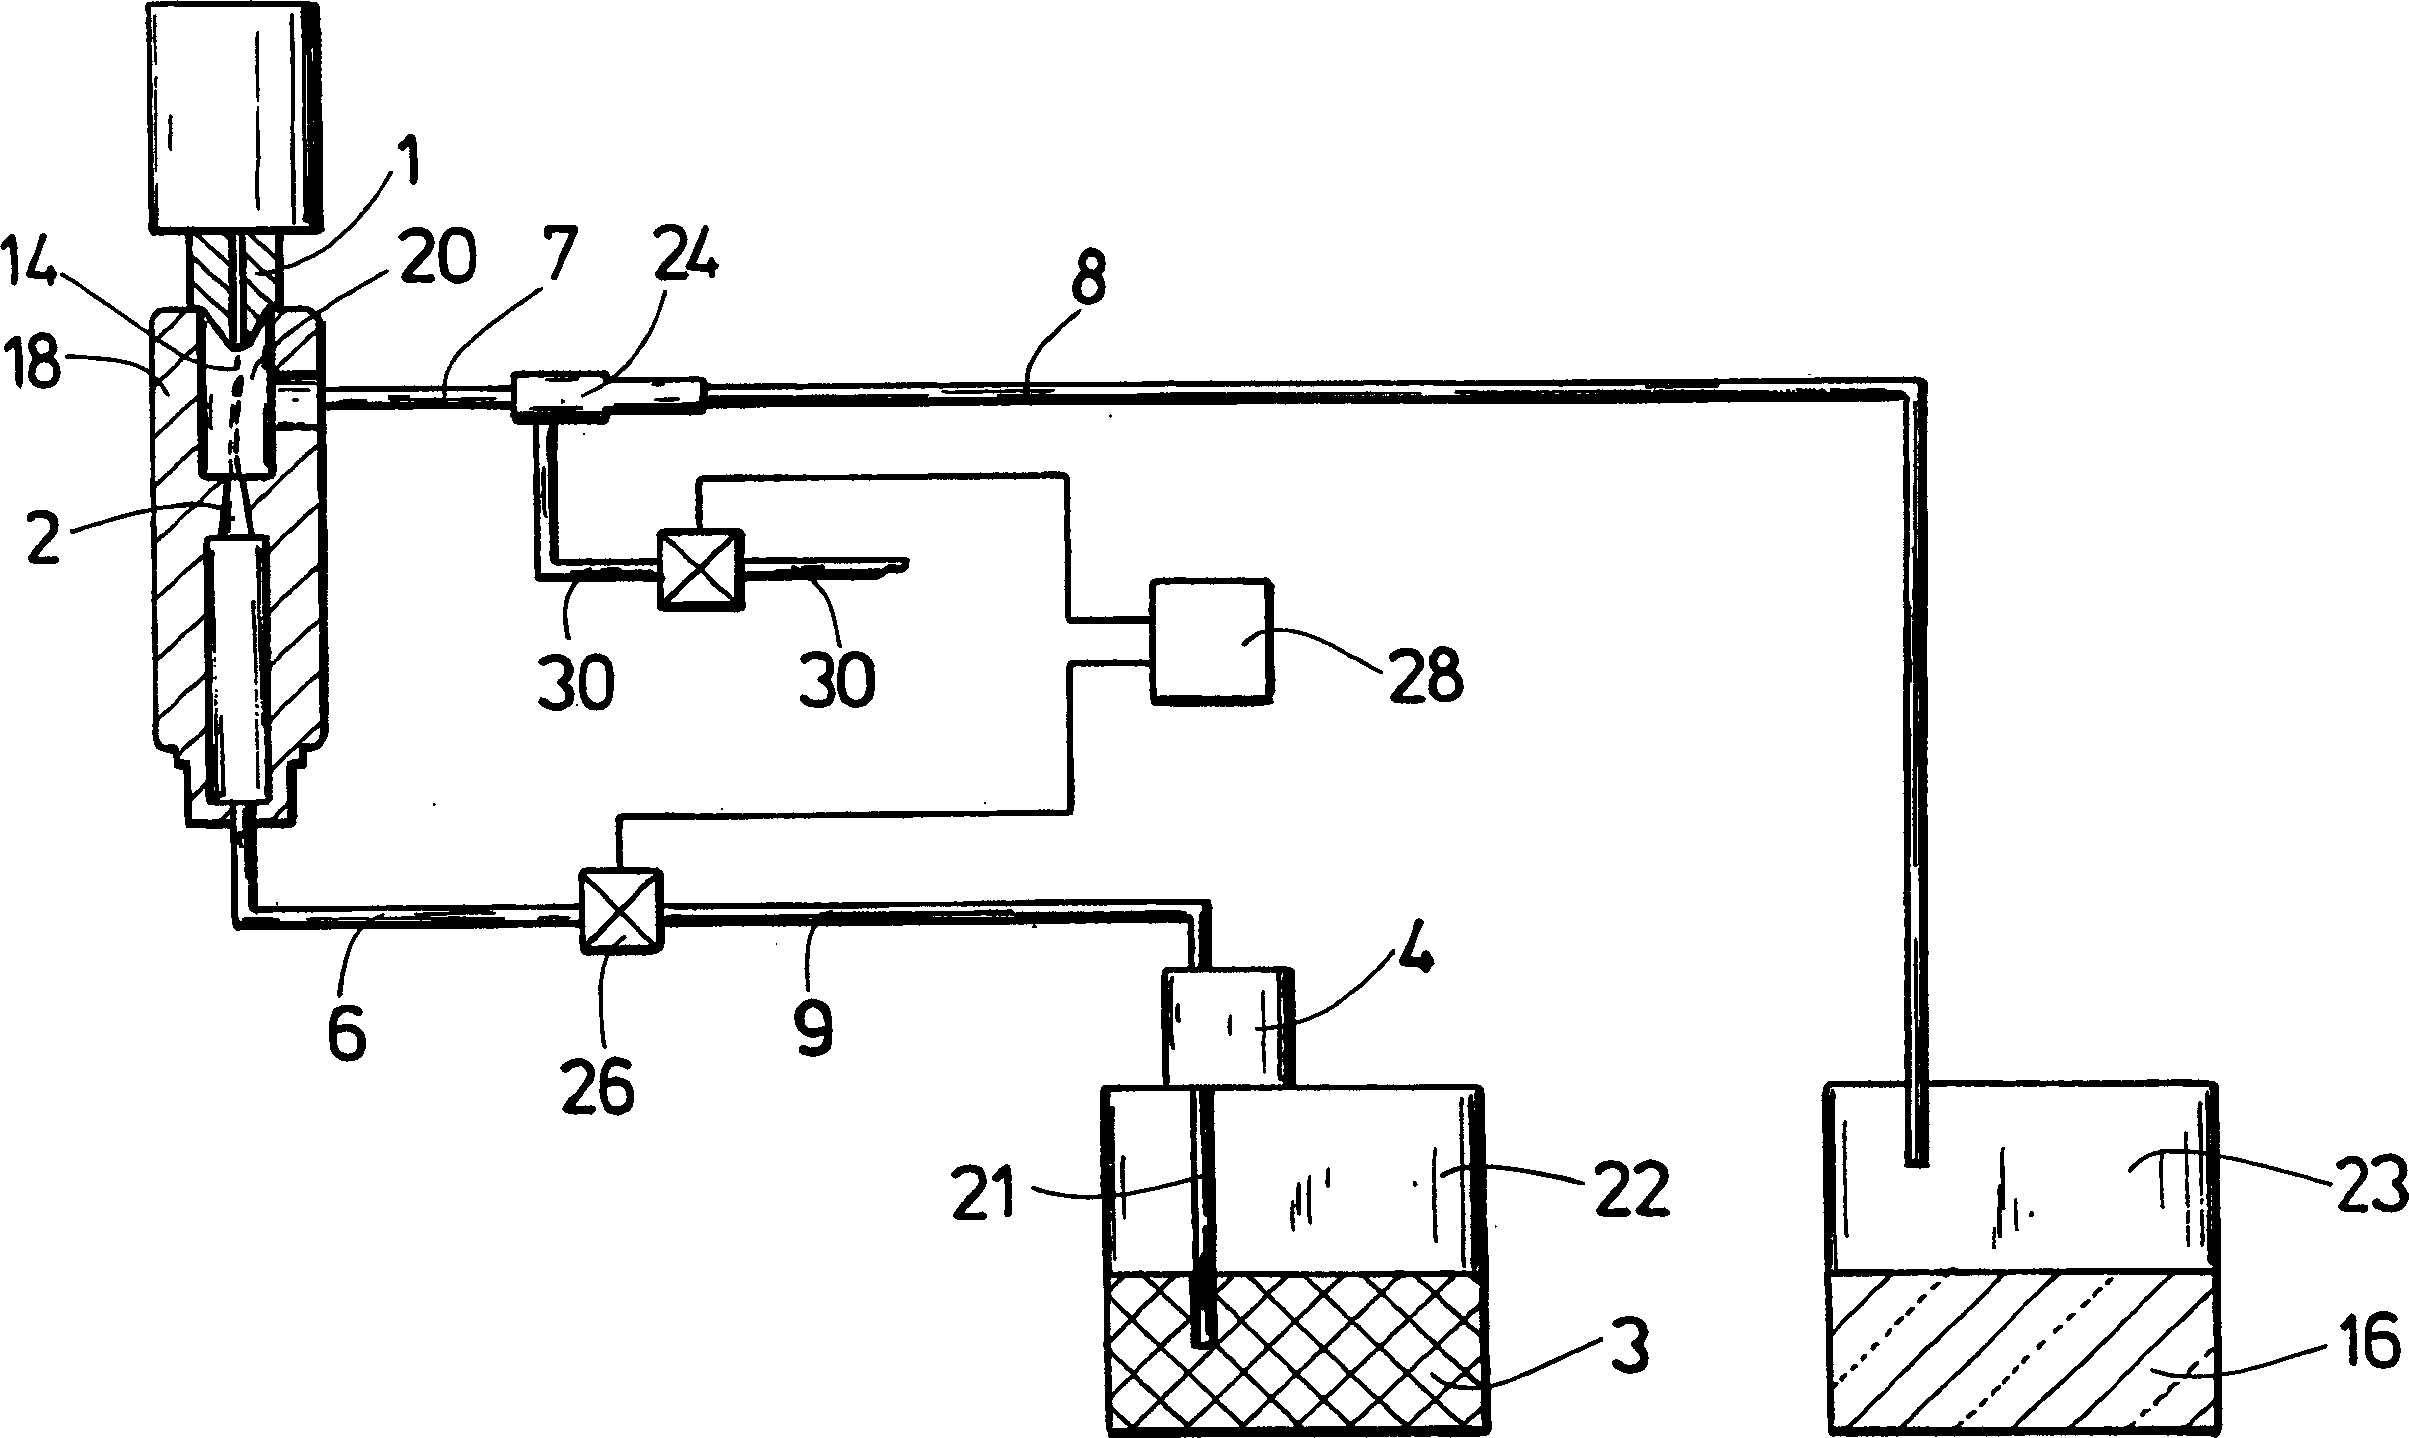 Device and method for cleaning gluing nozzle